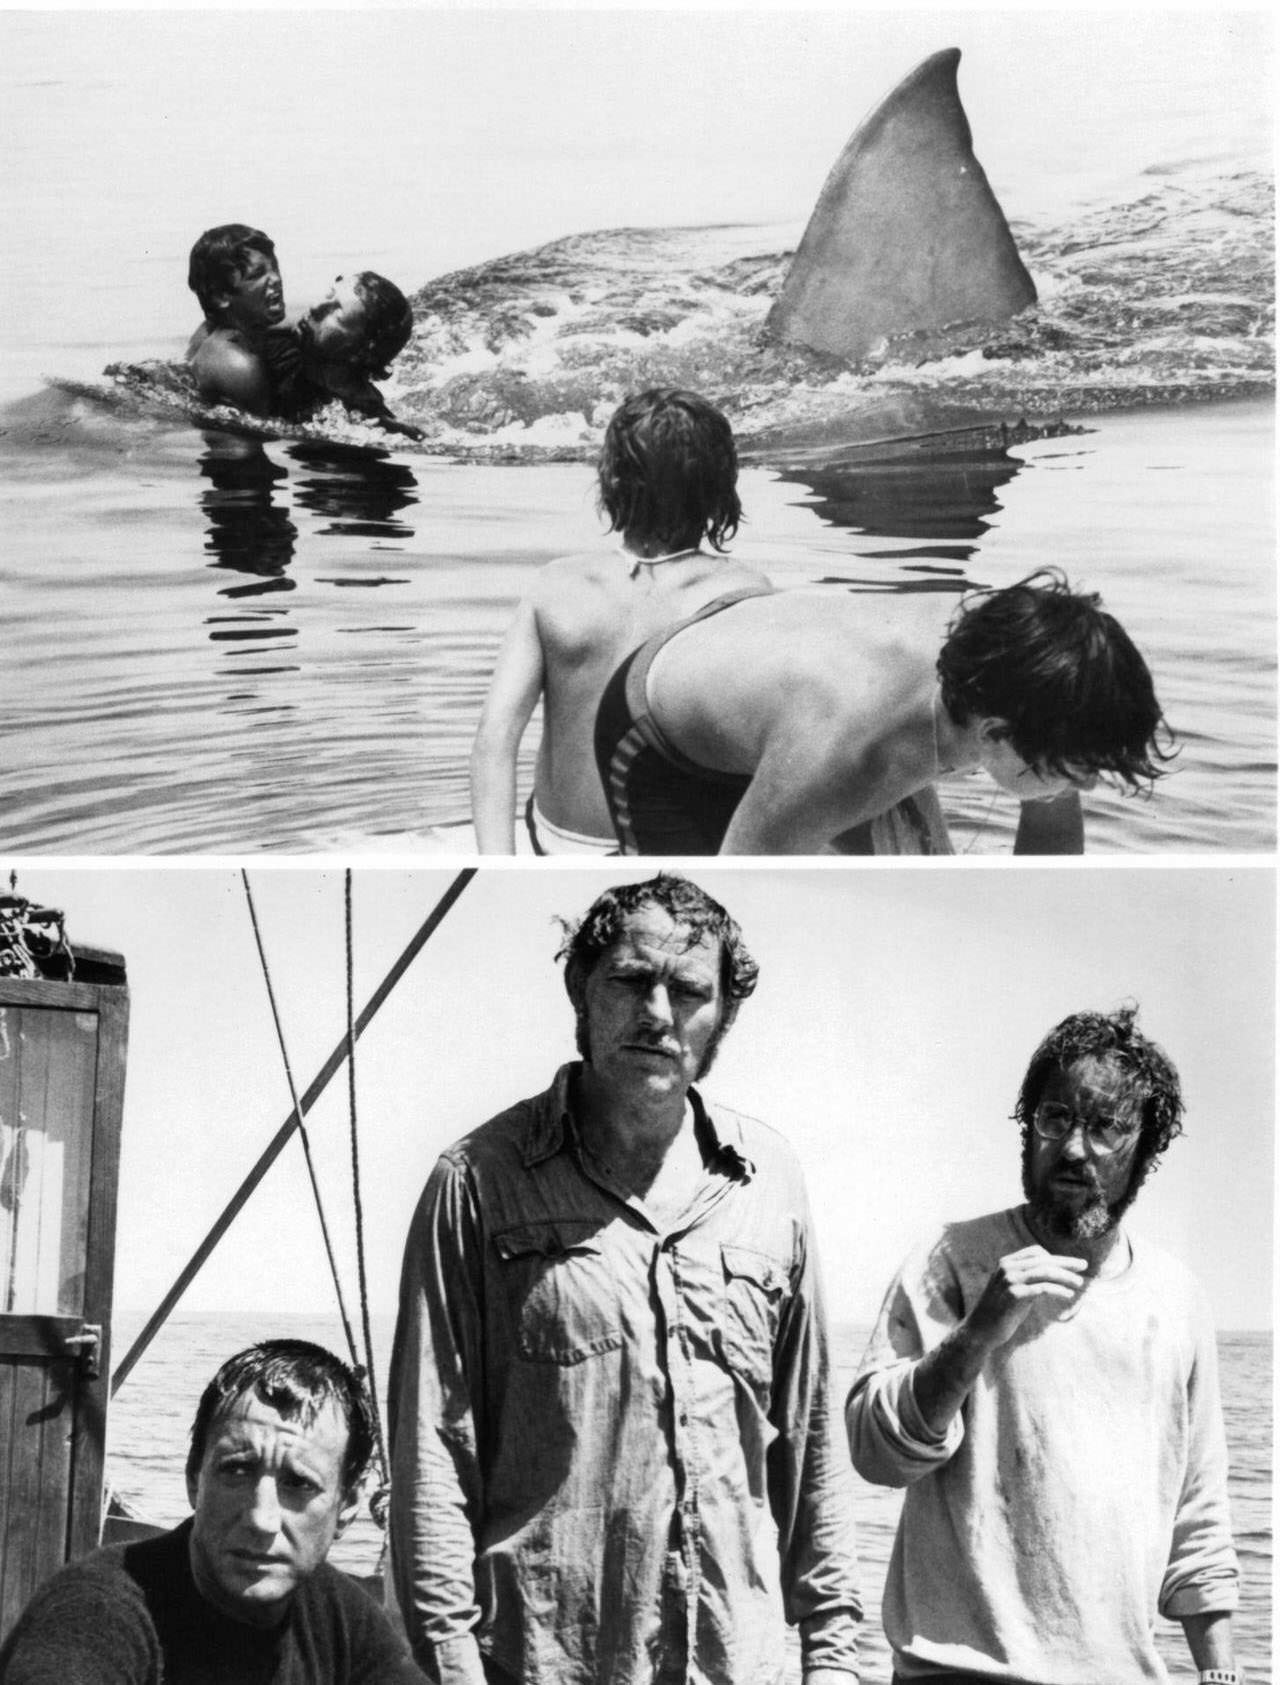 Great White Shark attacks swimmers (above), Roy Scheider, Robert Shaw, and Richard Dreyfuss on boat in serious contemplation in a scene from the film 'Jaws', 1975.